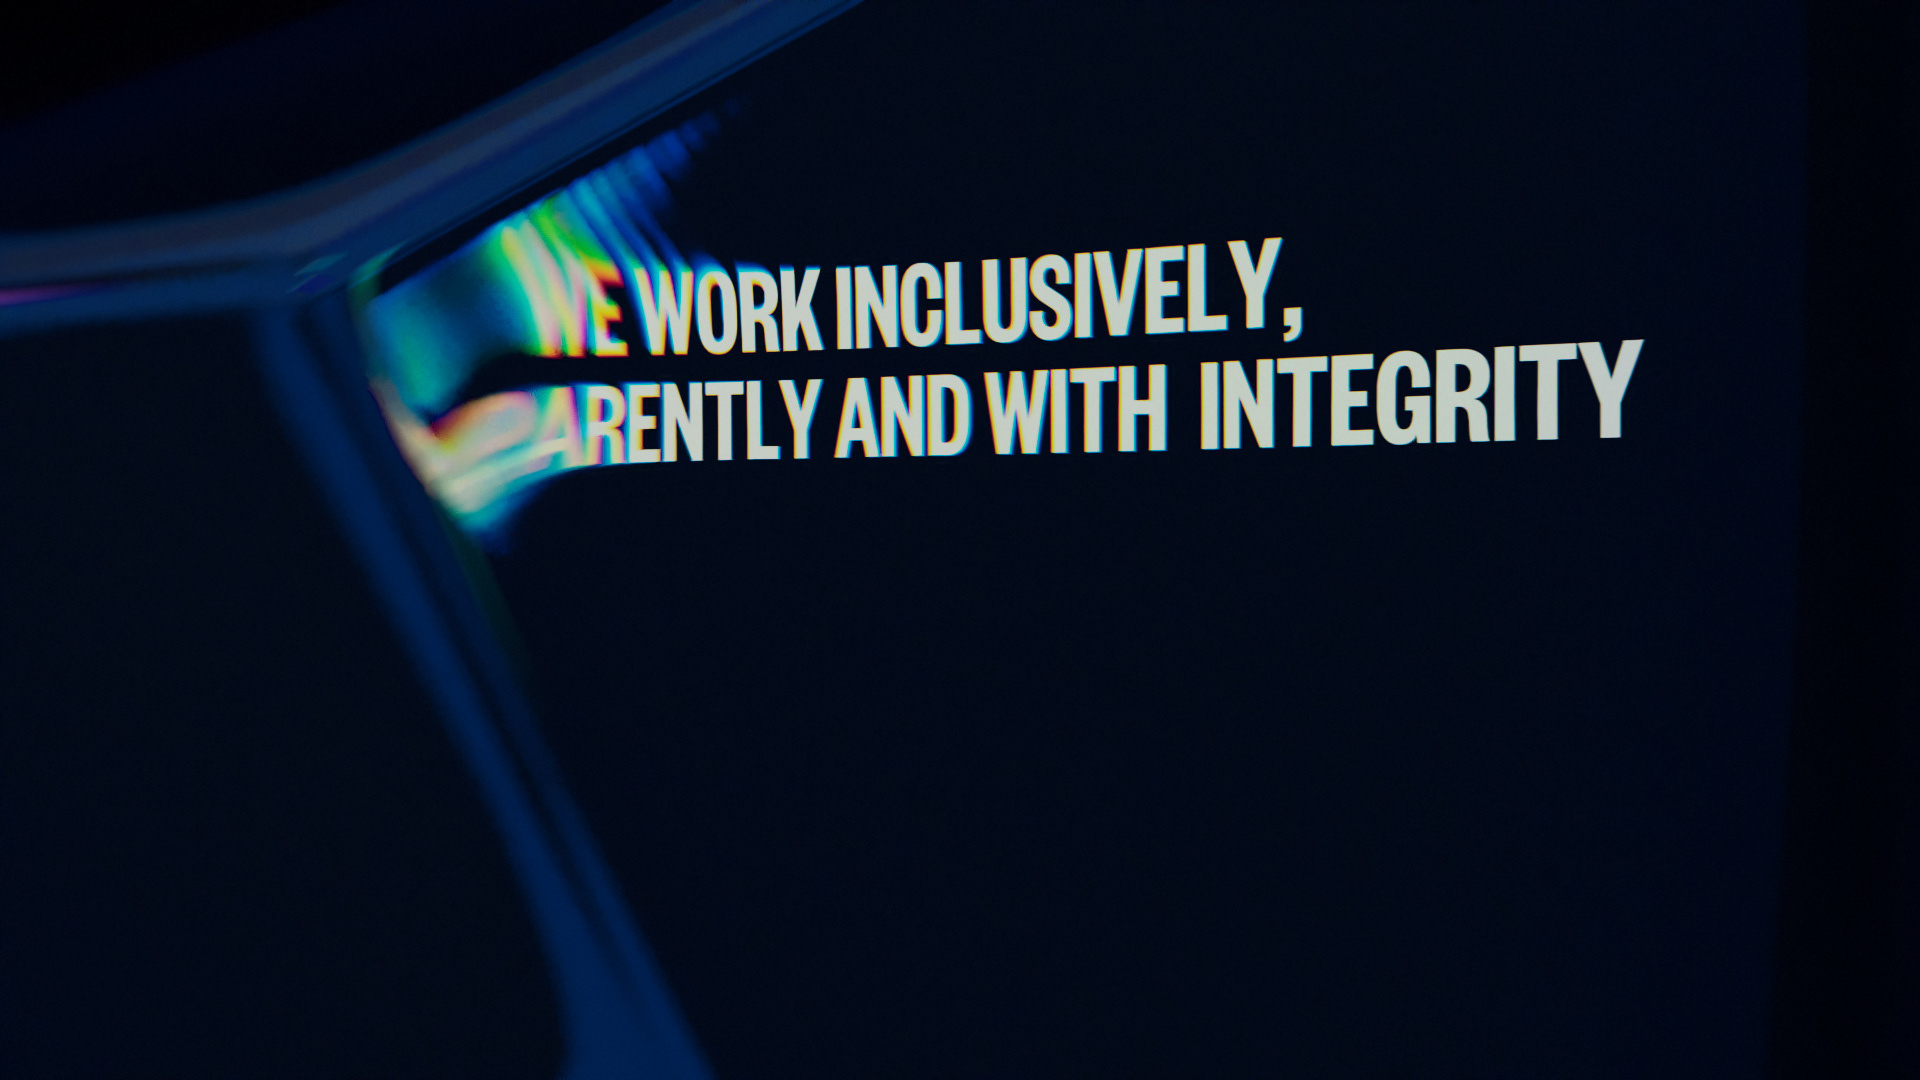 Work-inclusively